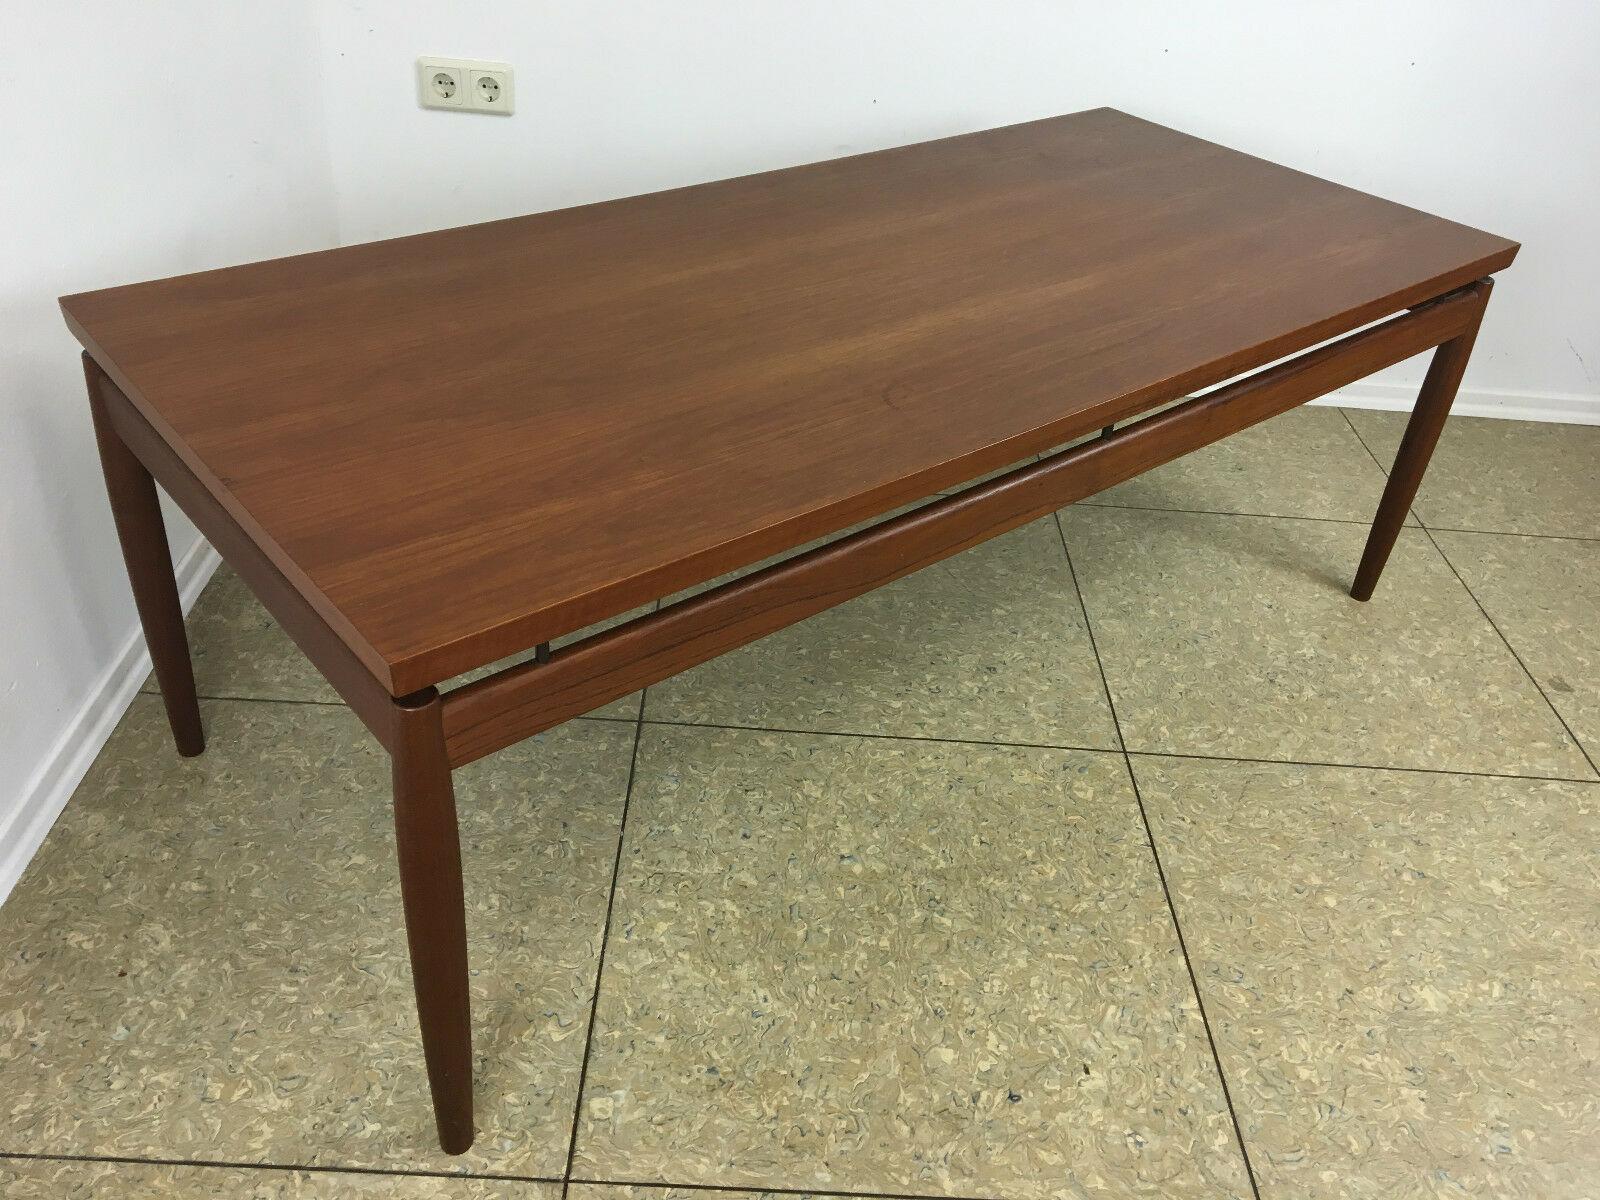 60s 70s Teak Coffee Table Table Grete Jalk France & Son Denmark Design

Object: coffee table

Manufacturer: Grete Jalk / France & Son

Condition: good

Age: around 1960-1970

Dimensions:

150cm x 66cm x 54cm

Other notes:

The